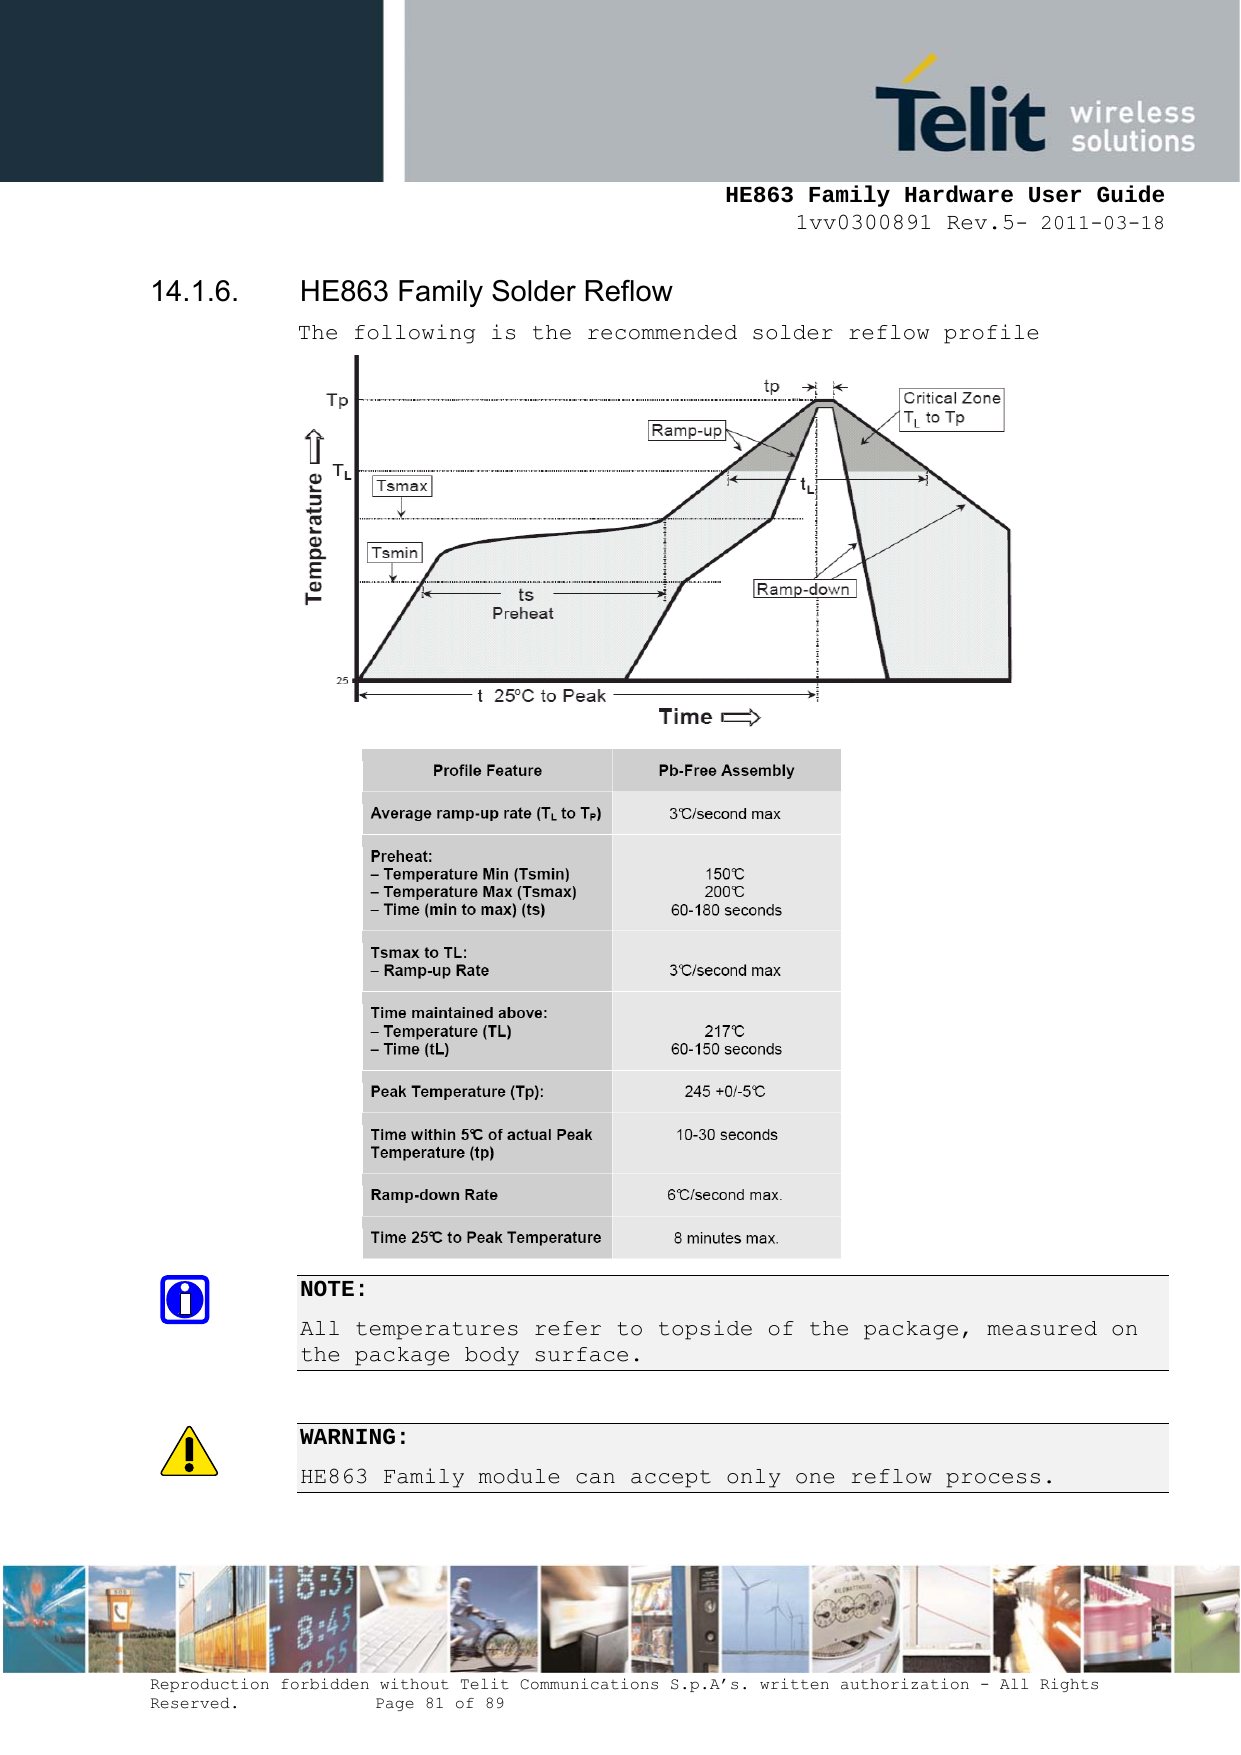     HE863 Family Hardware User Guide 1vv0300891 Rev.5- 2011-03-18    Reproduction forbidden without Telit Communications S.p.A’s. written authorization - All Rights Reserved.    Page 81 of 89  14.1.6.  HE863 Family Solder Reflow The following is the recommended solder reflow profile   NOTE:  All temperatures refer to topside of the package, measured on the package body surface.  WARNING:  HE863 Family module can accept only one reflow process.  